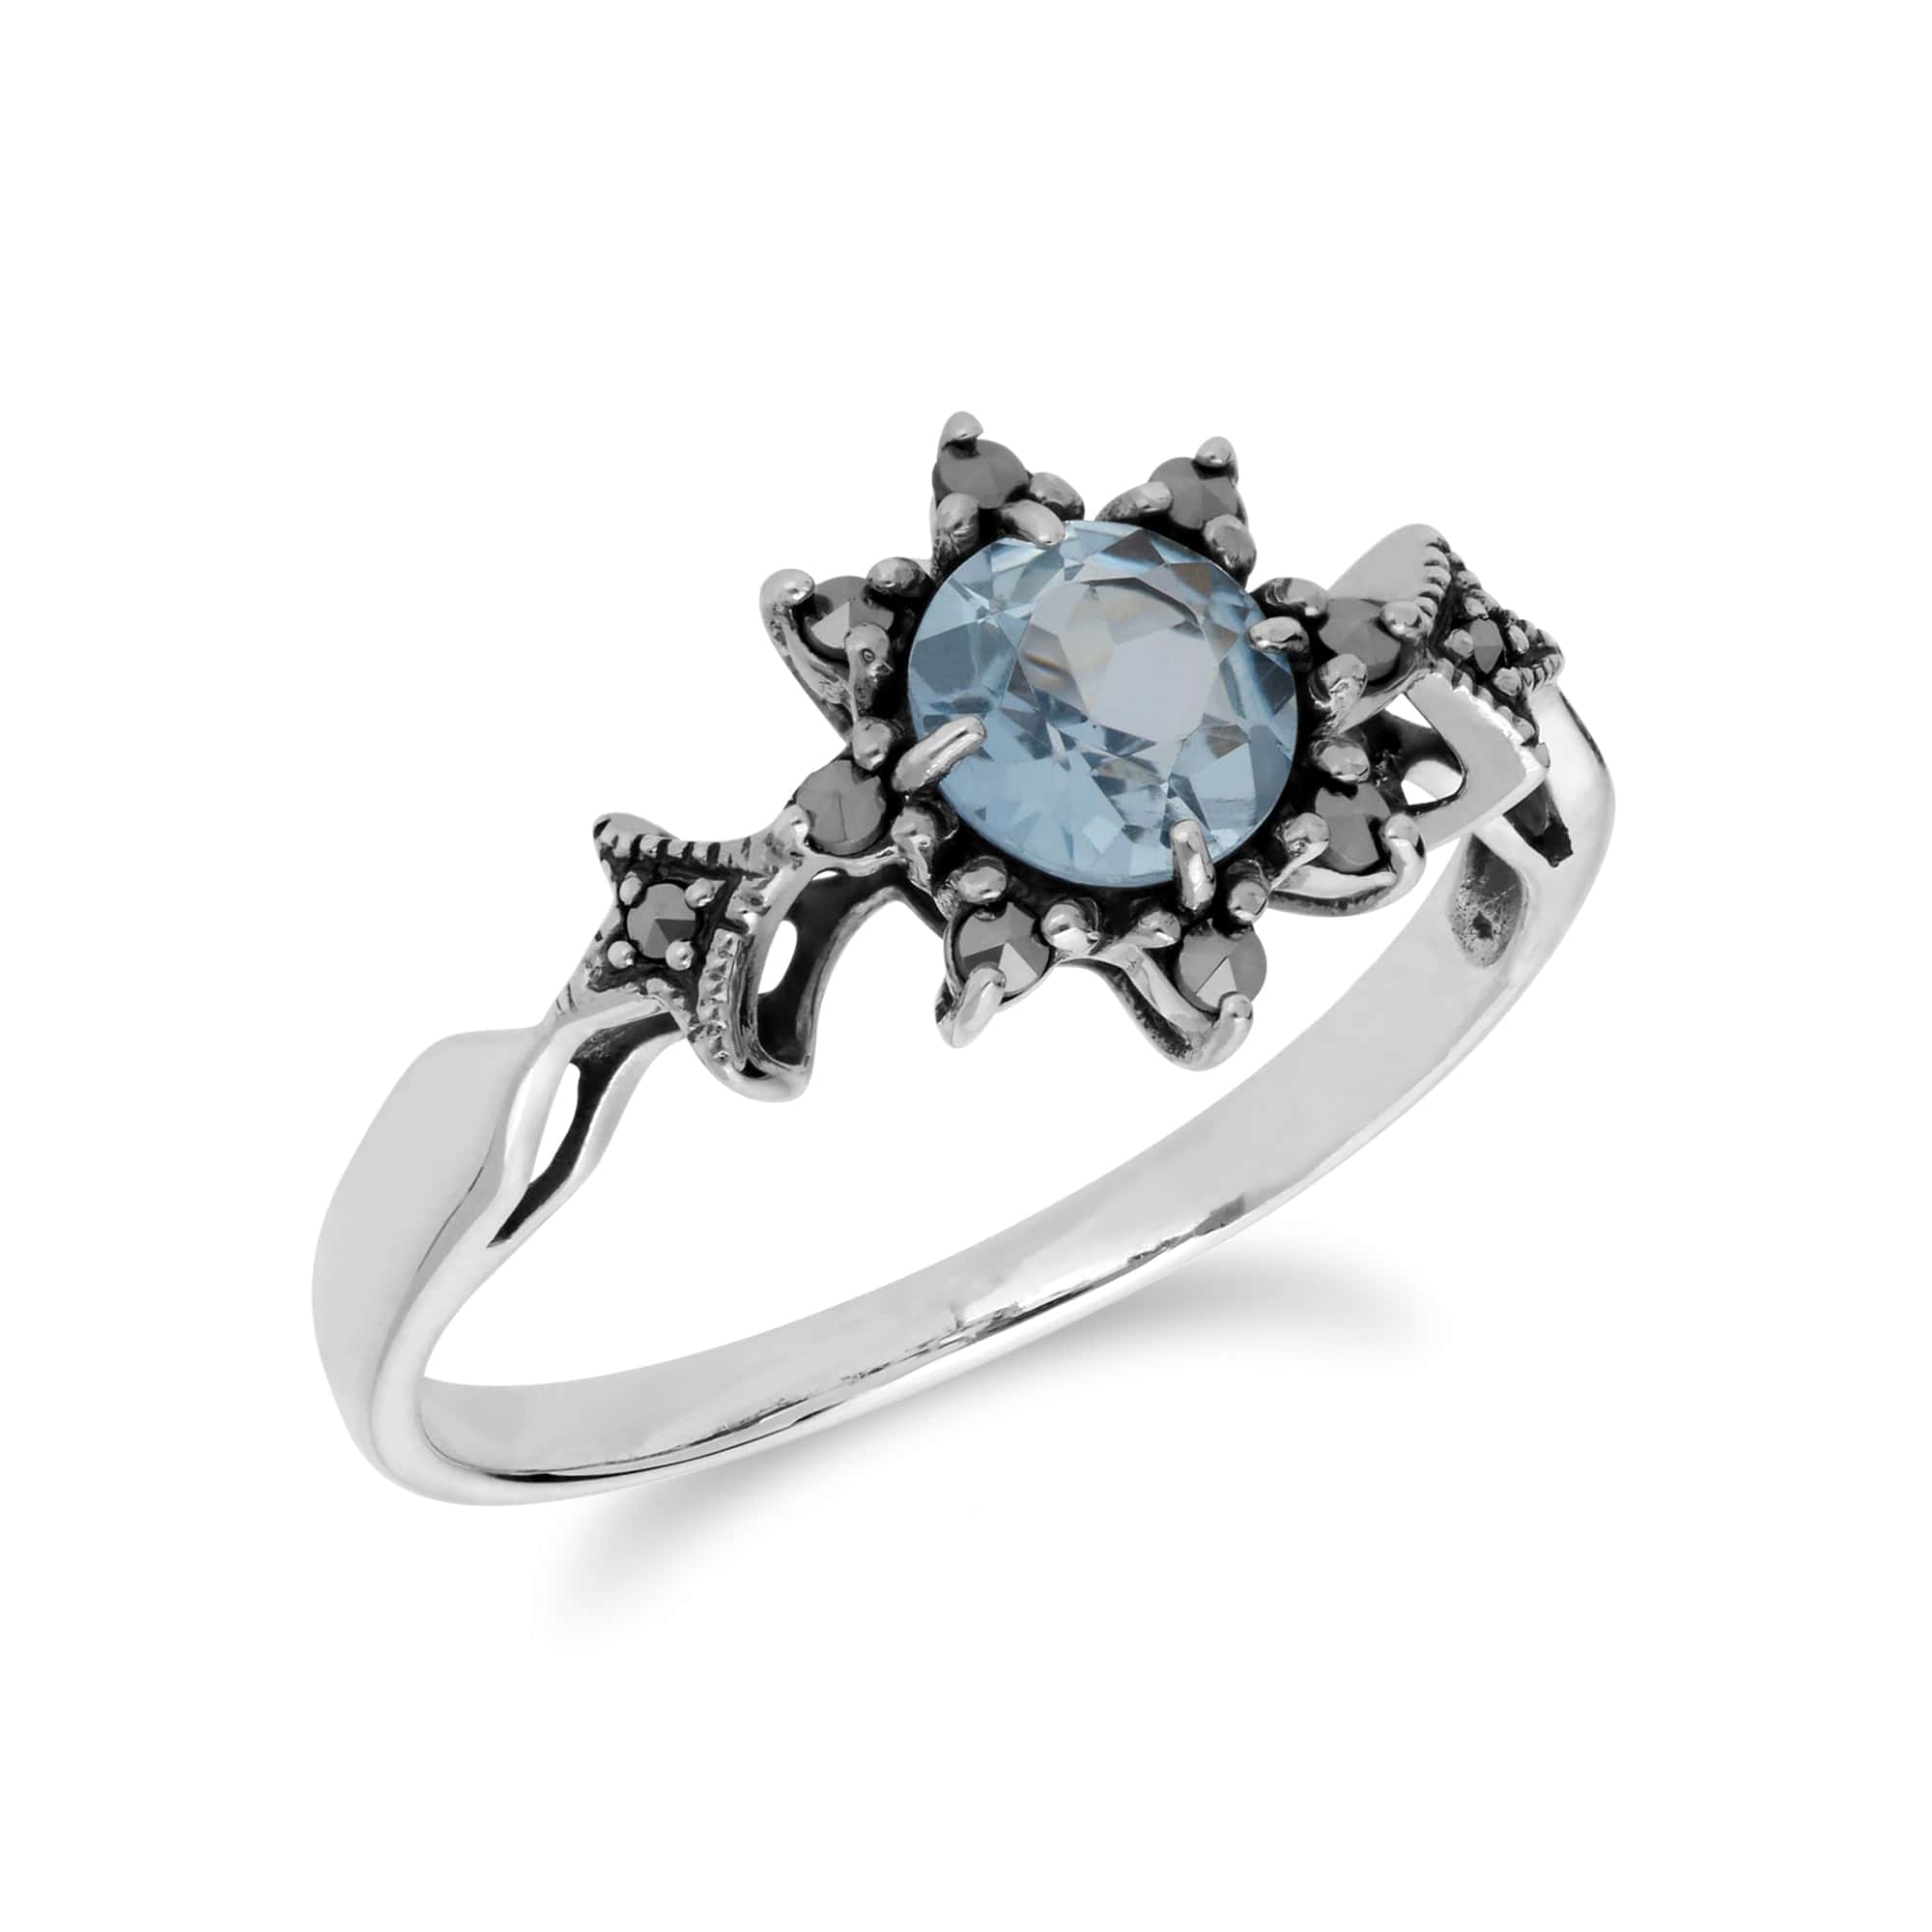 Art Deco Style Round Blue Topaz & Marcasite Floral Ring in 925 Sterling Silver - Gemondo